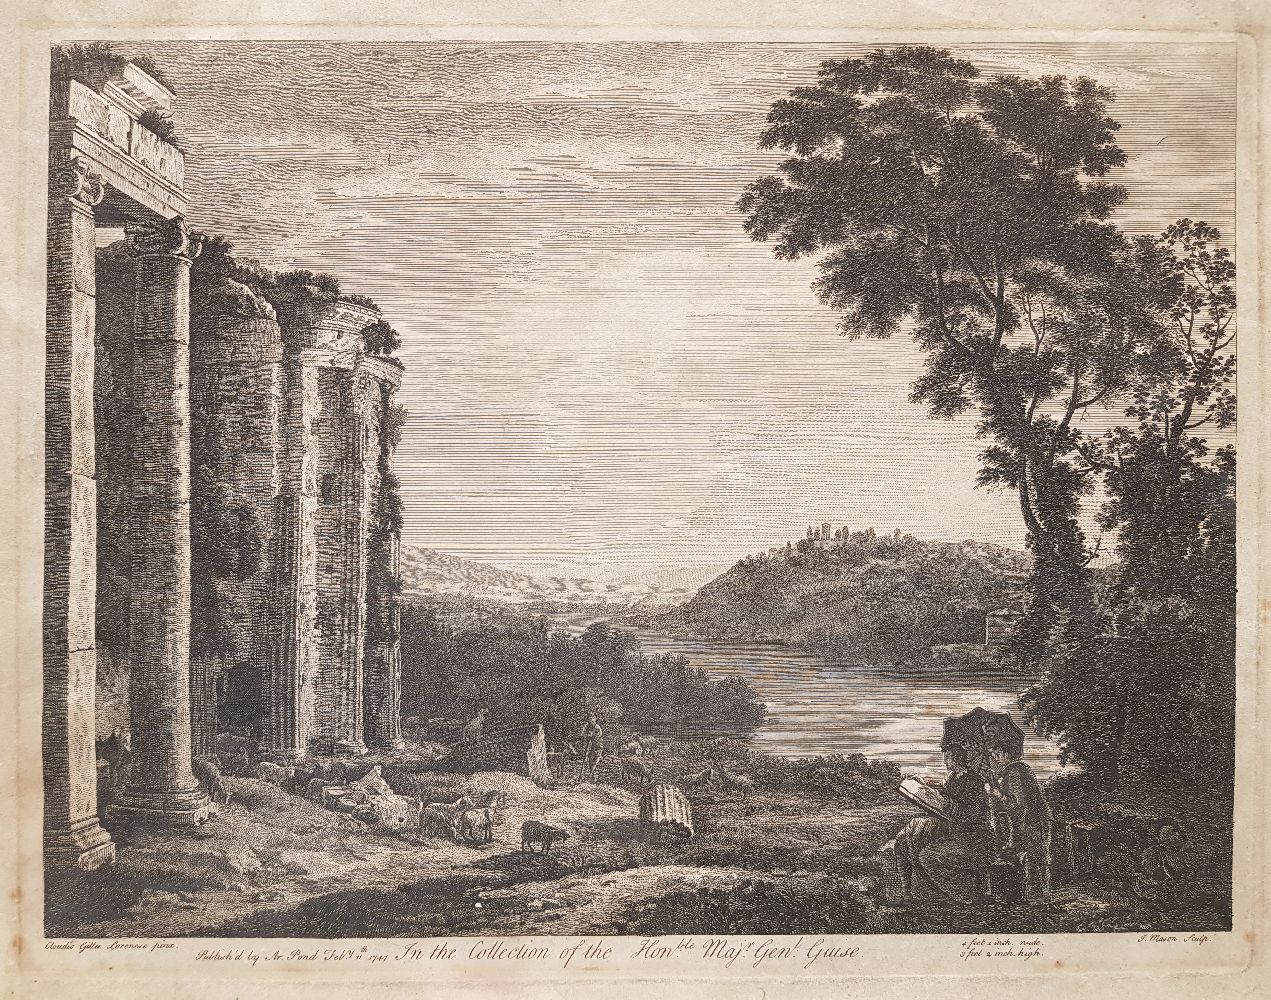 James Mason, British 1710-c.1785- Landscape and Ruins, after Claude Lorraine; etching and engraving,